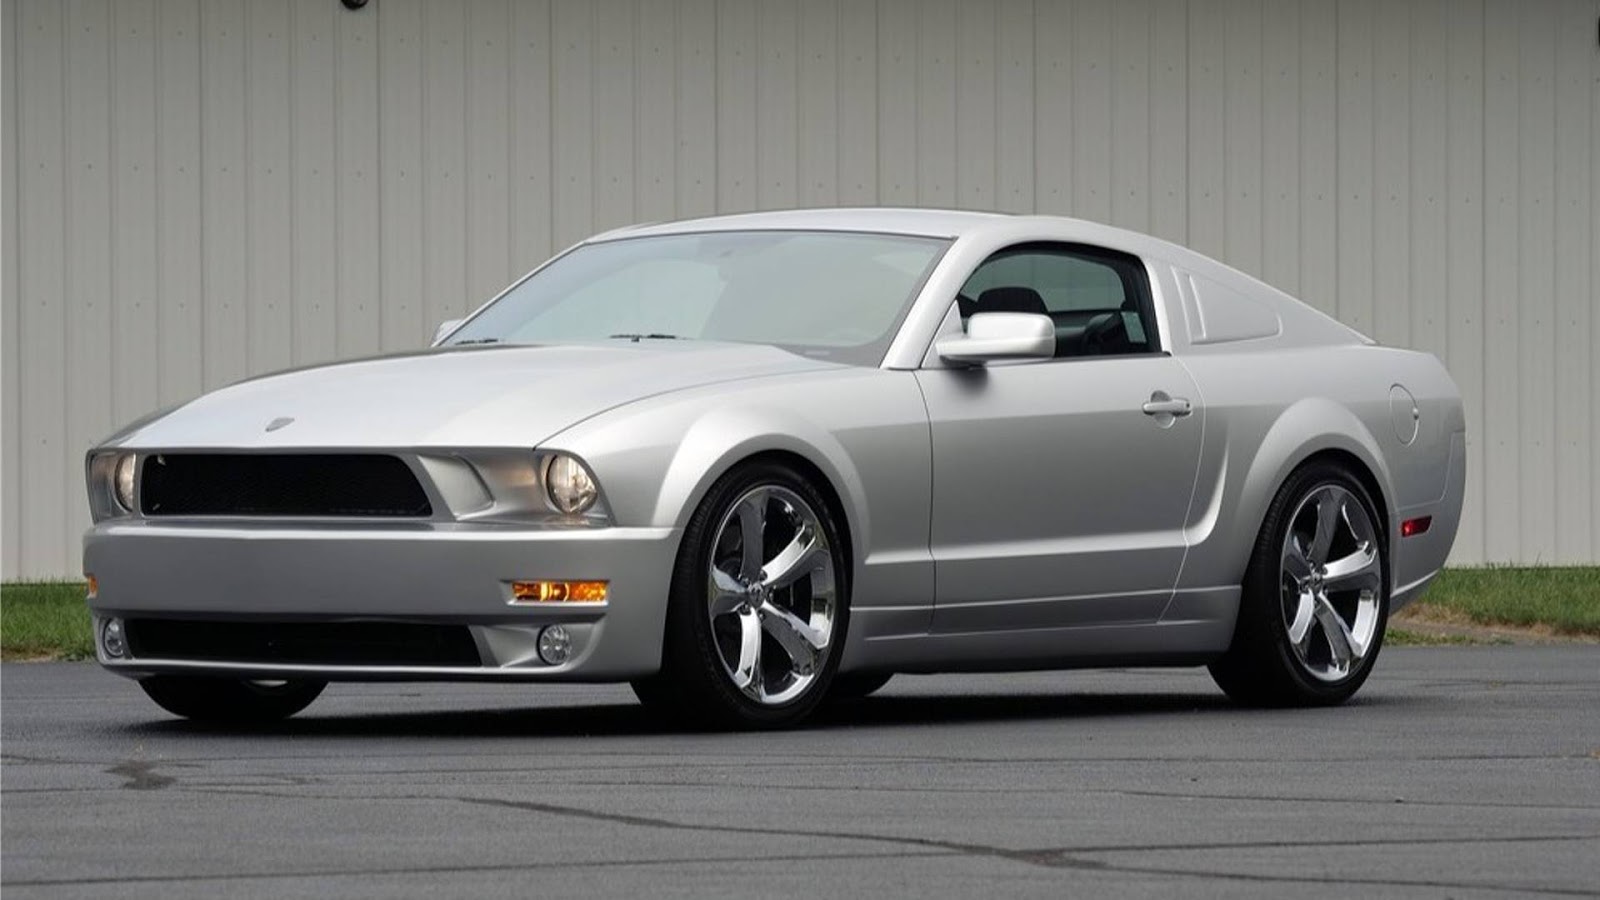 2009 ford mustang iacocca 45th anniversary edition2B2 Ο νονός της Mustang, Lee Iacocca, απεβίωσε στα 94 του